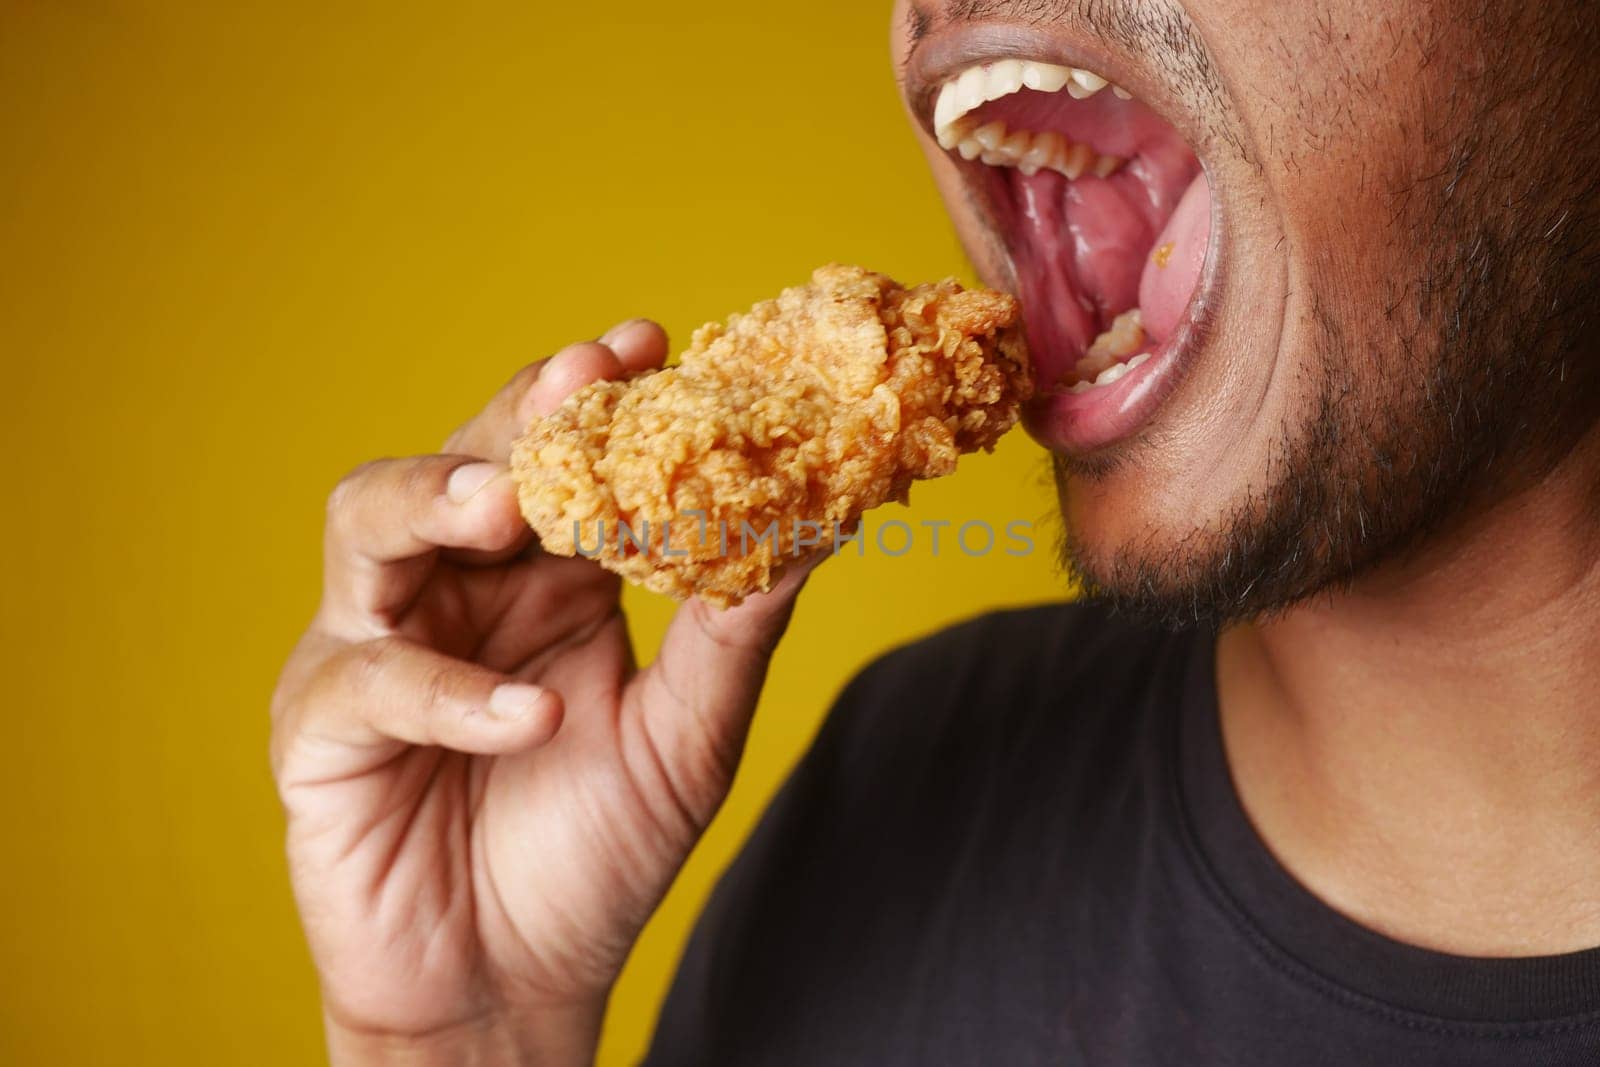 Man enjoying fried chicken, mouth open, savoring every bite with a big smile by towfiq007